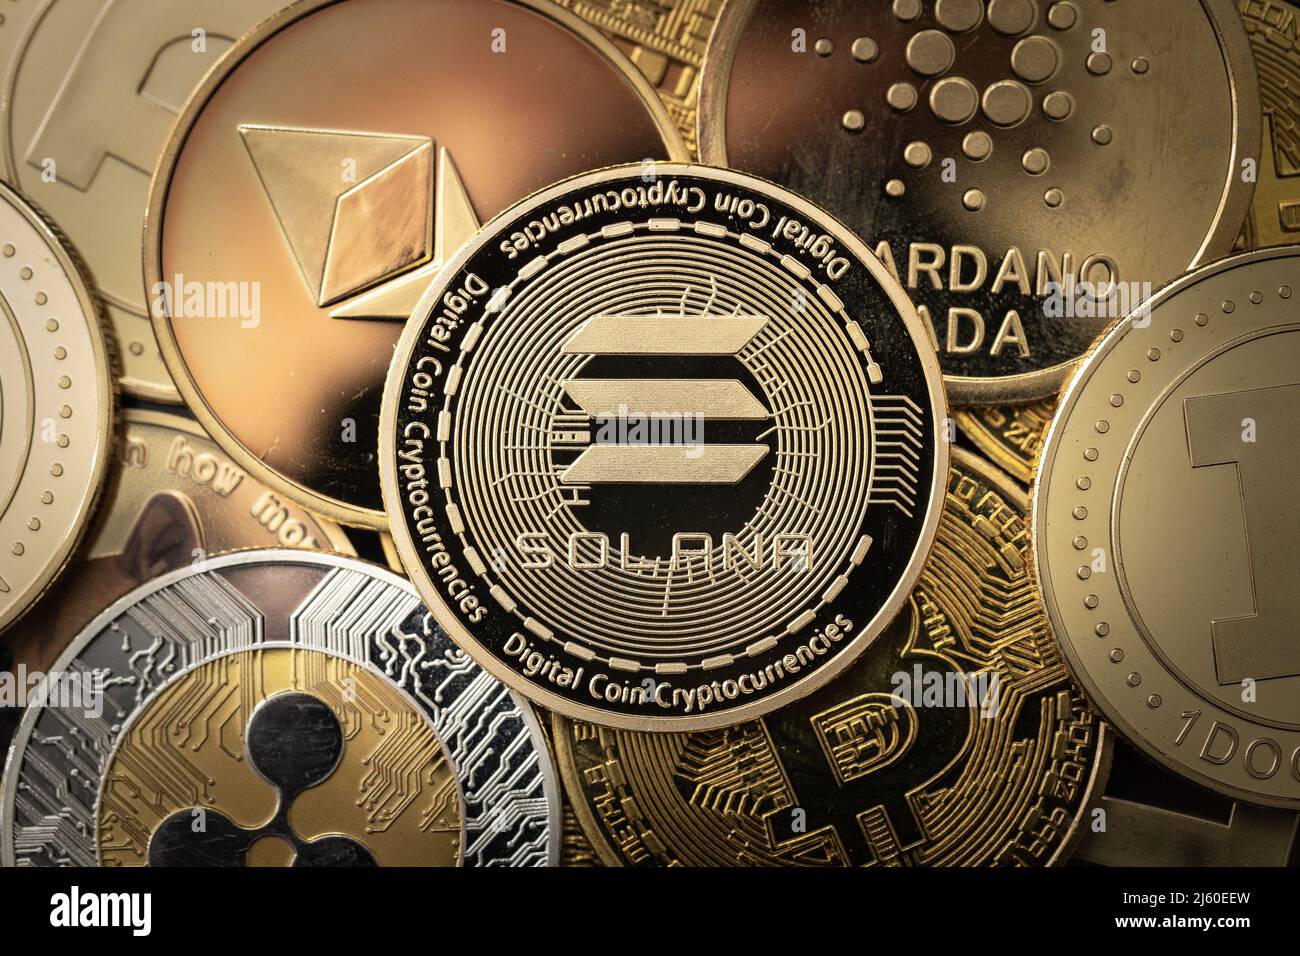 Solana SOL cryptocurrency physical coin on top of other cryptocurrencies. Stock Photo